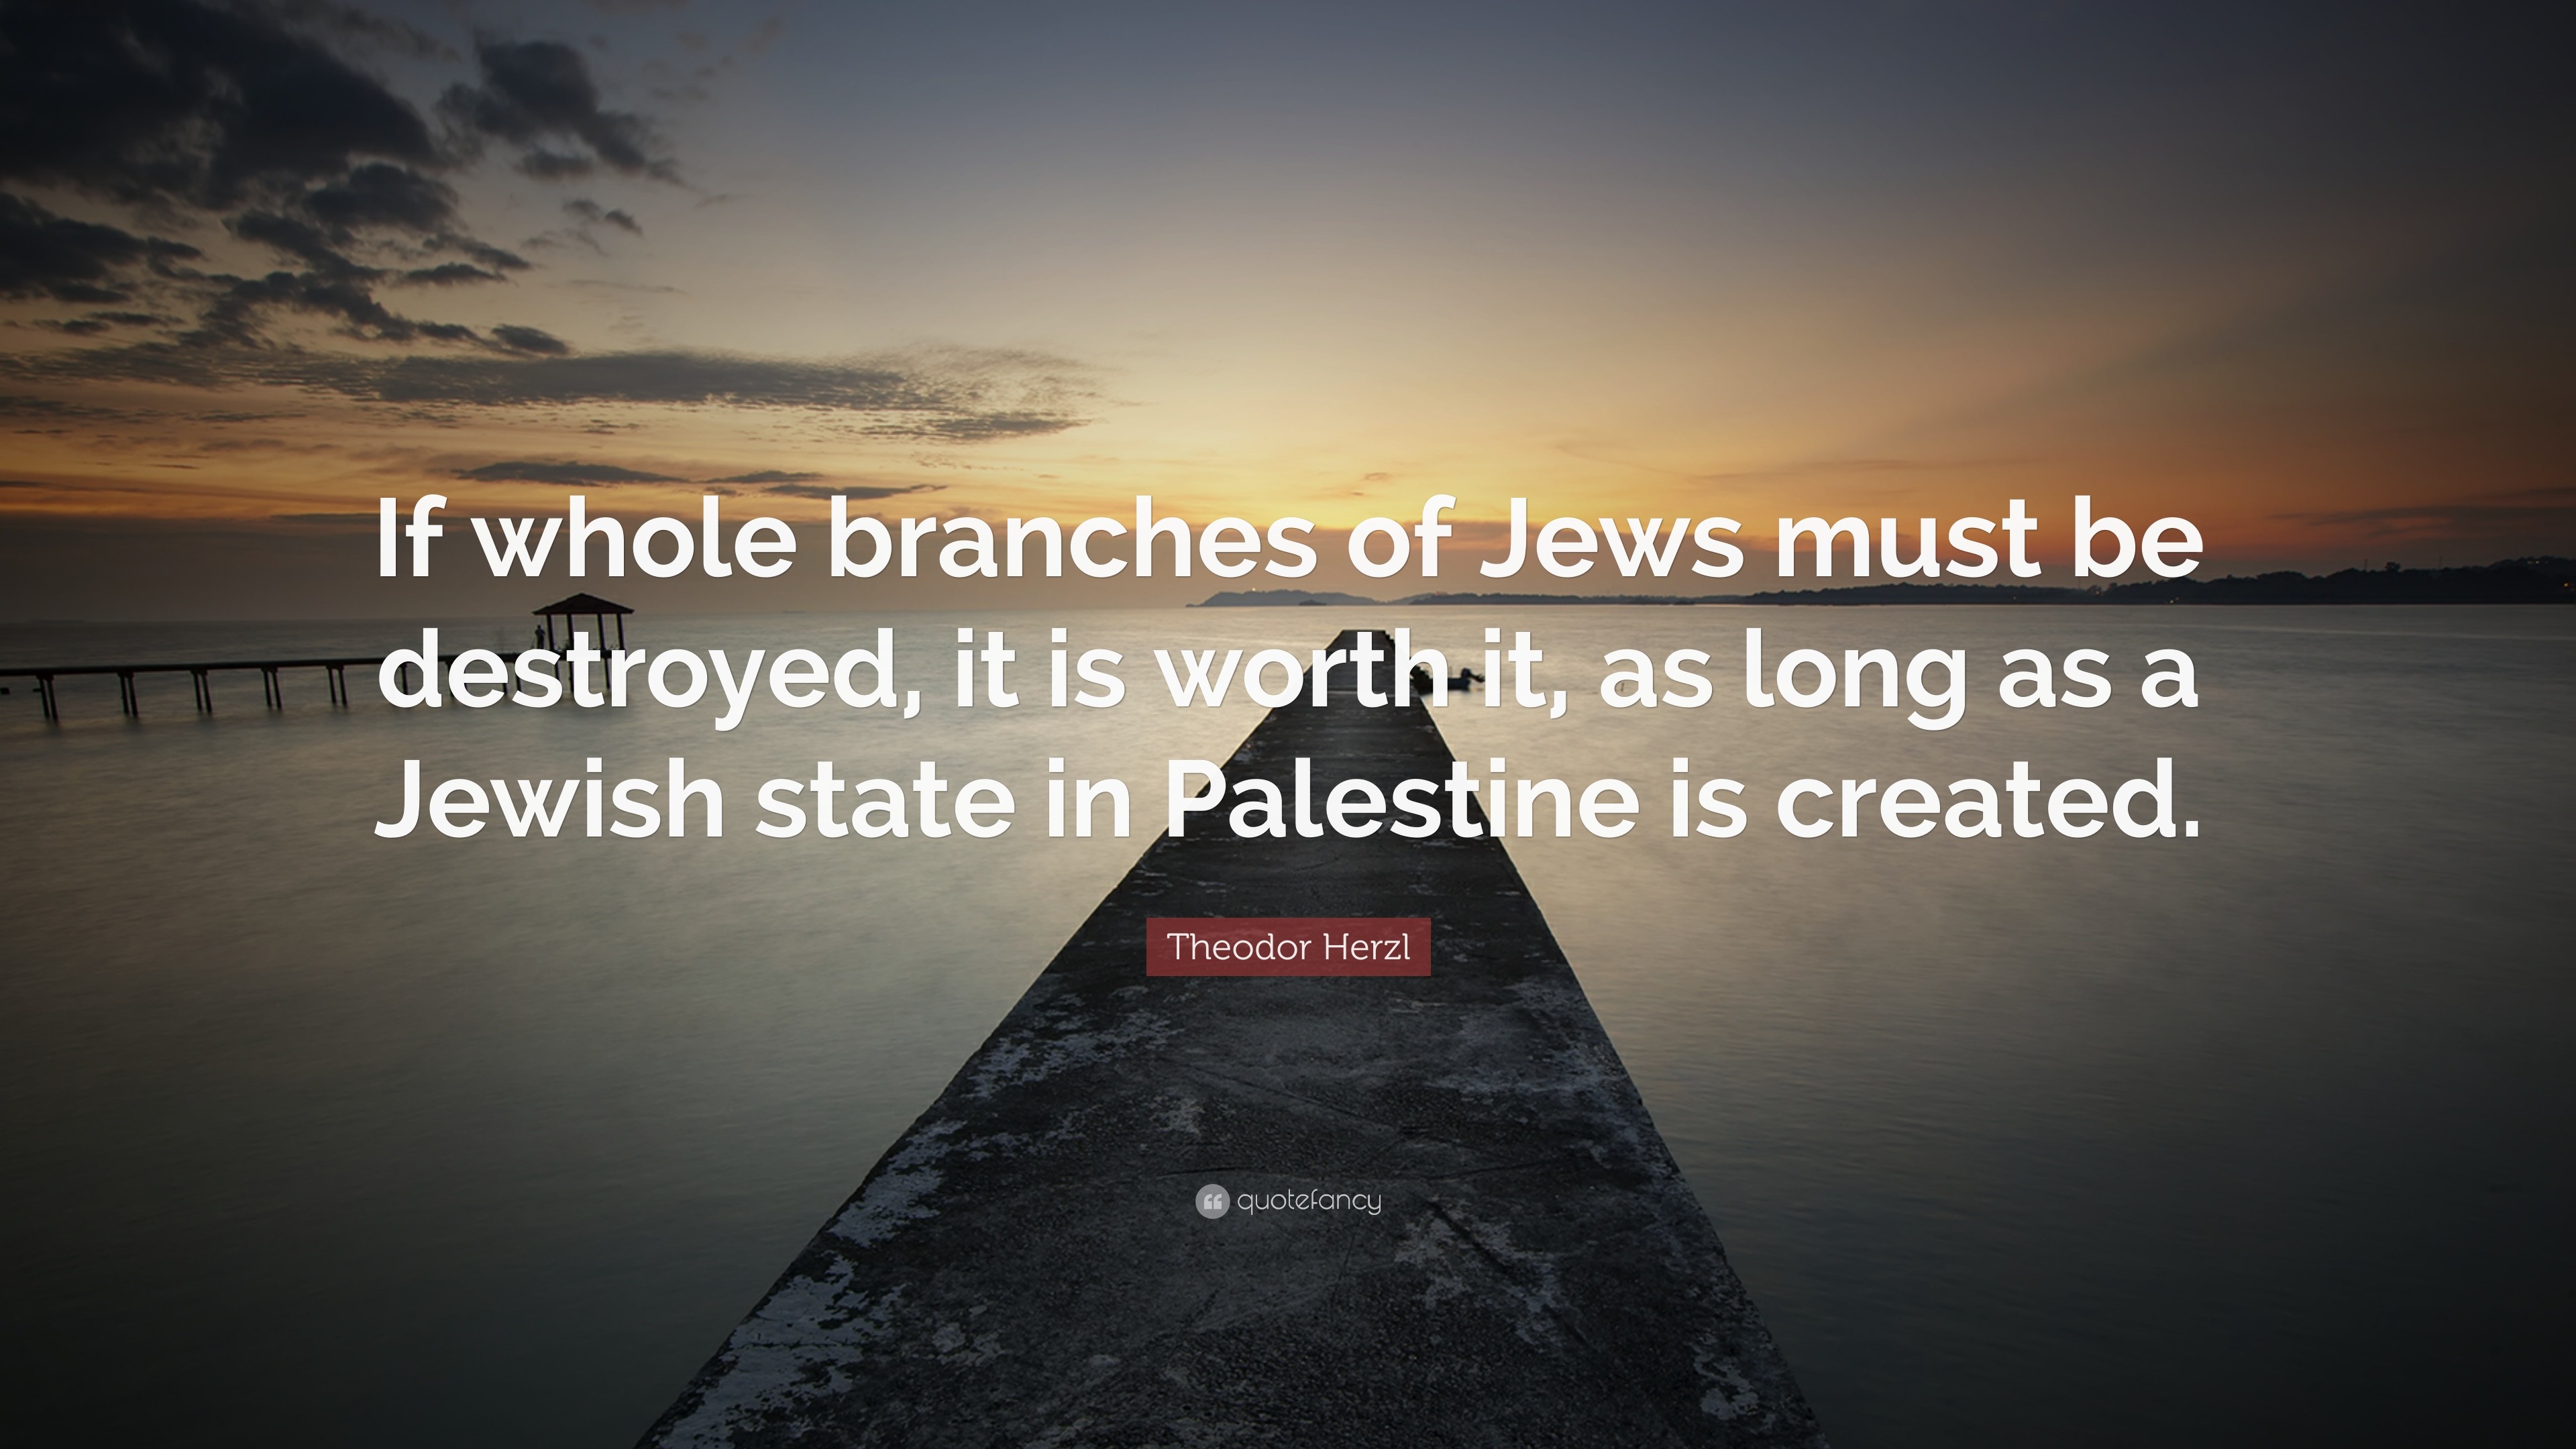 Theodor Herzl Quote: “If whole branches of Jews must be destroyed, it is